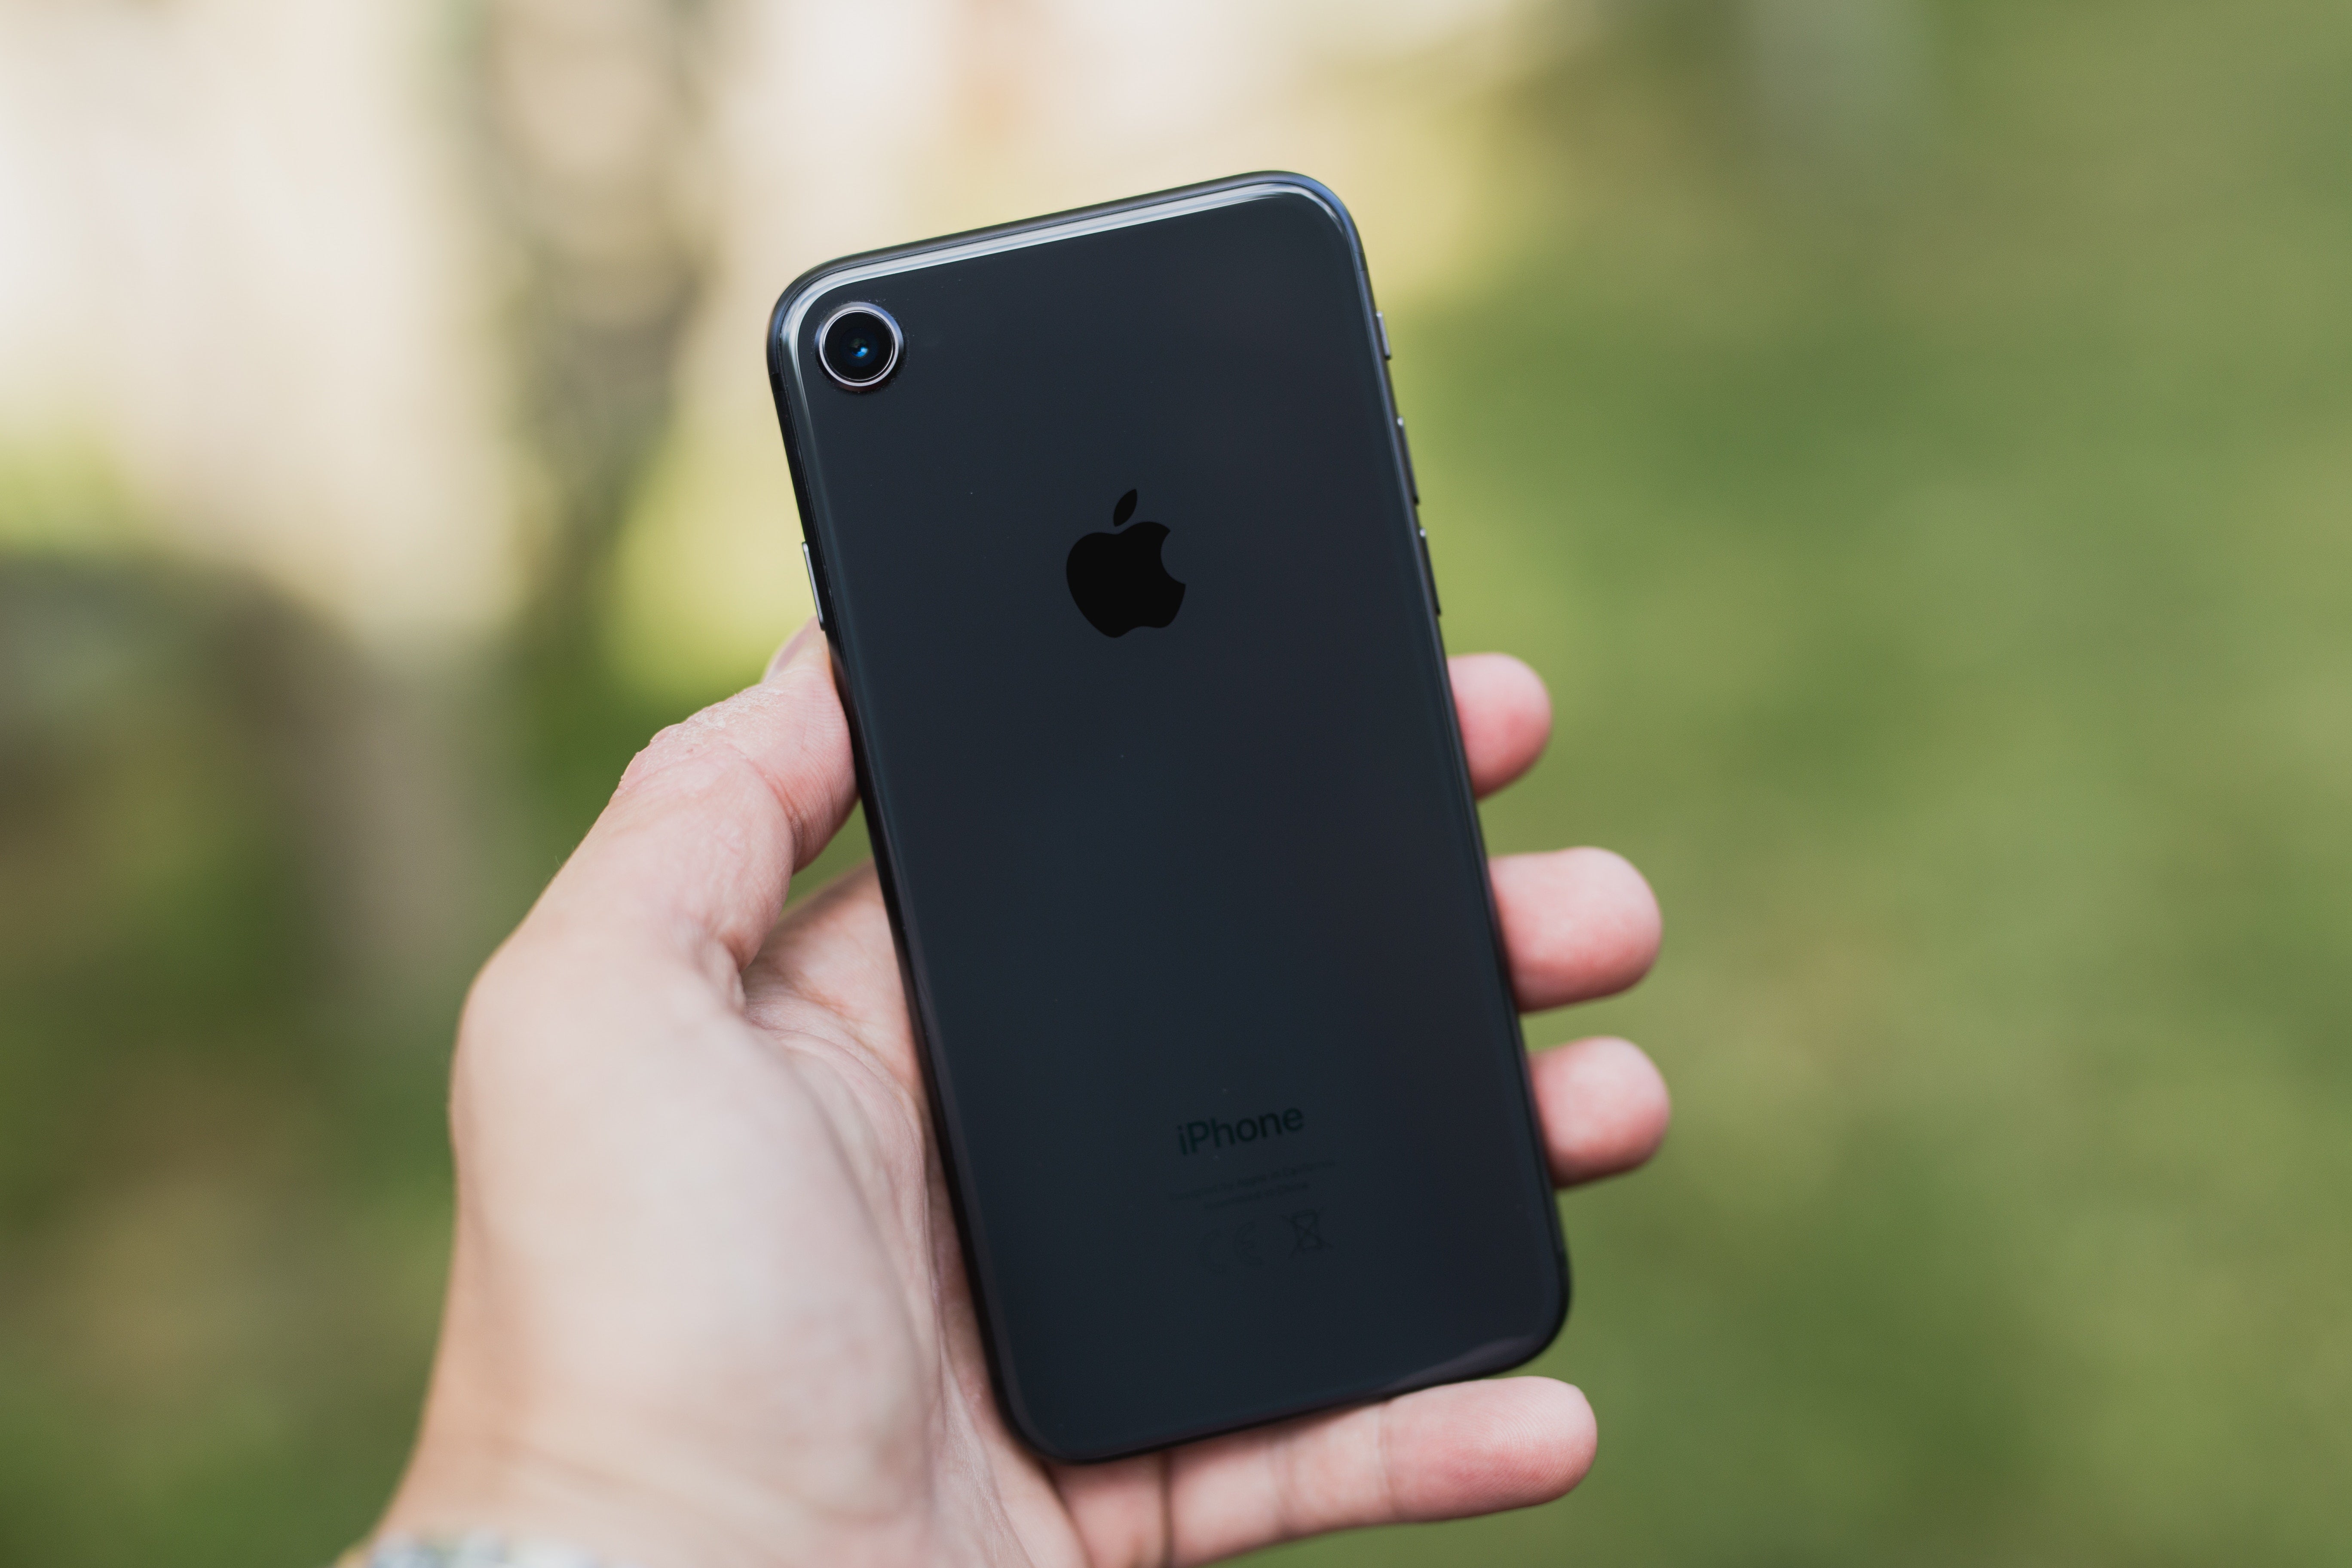 The iPhone 7 Plus is an amazing purchase in 2018